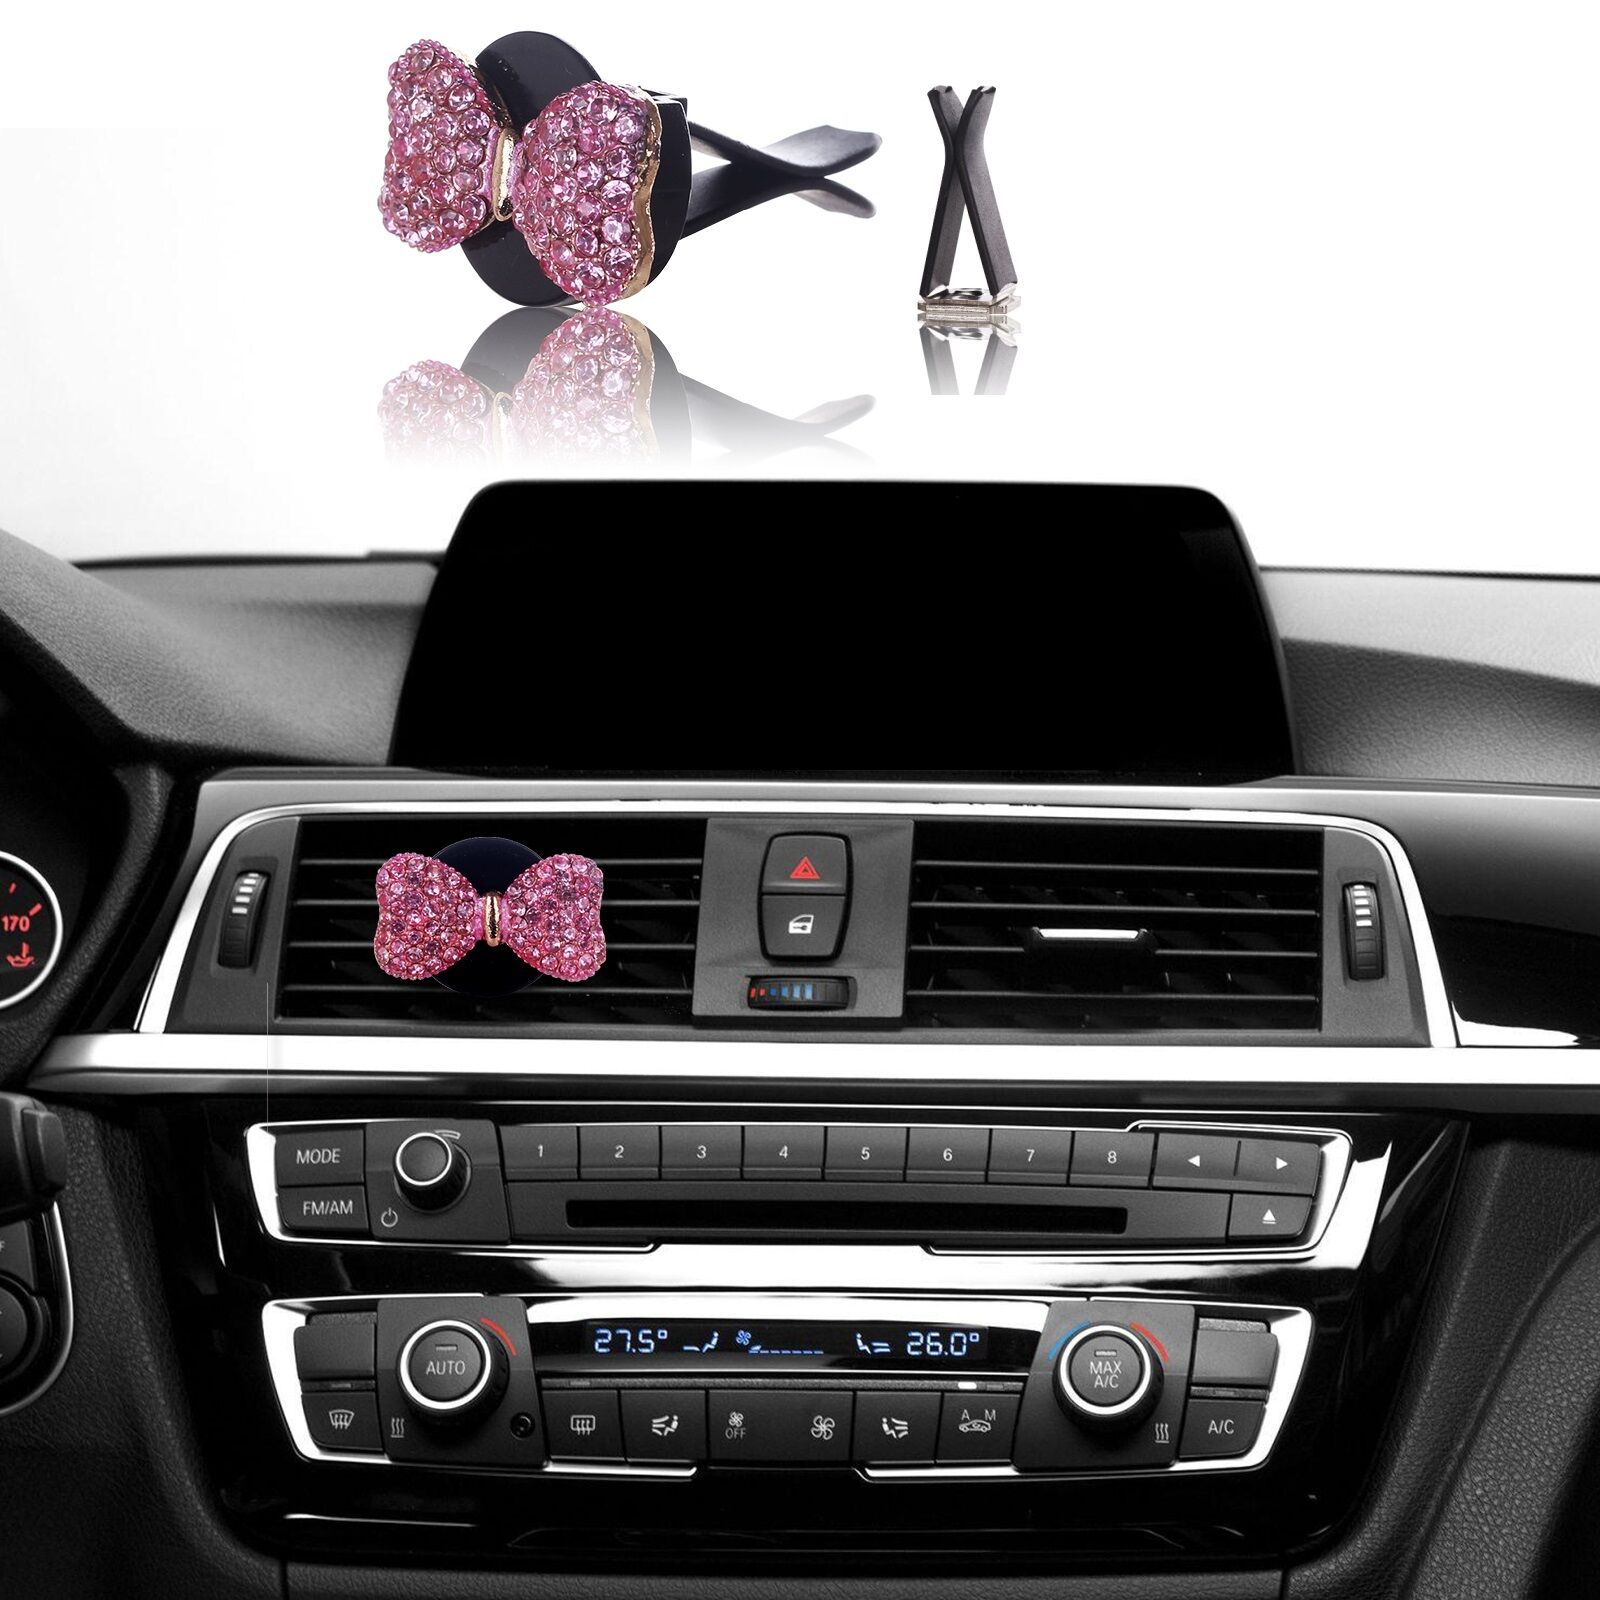 Bling Car Accessories Interior Decoration for Girls Women - Pink Crystal Bow